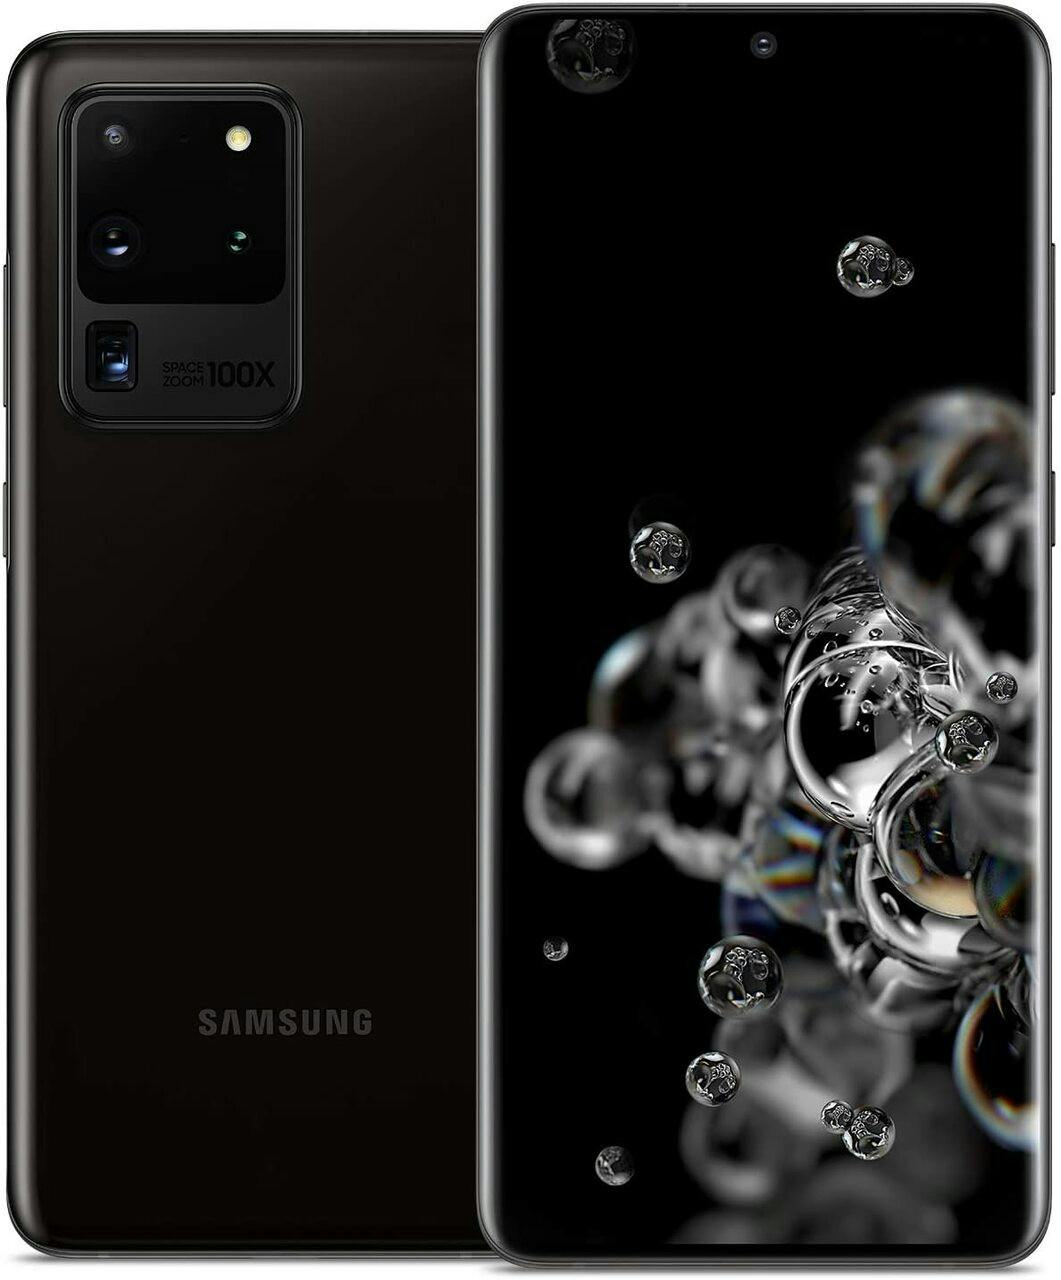 Samsung Galaxy S20 lineup: specs, reviews and prices